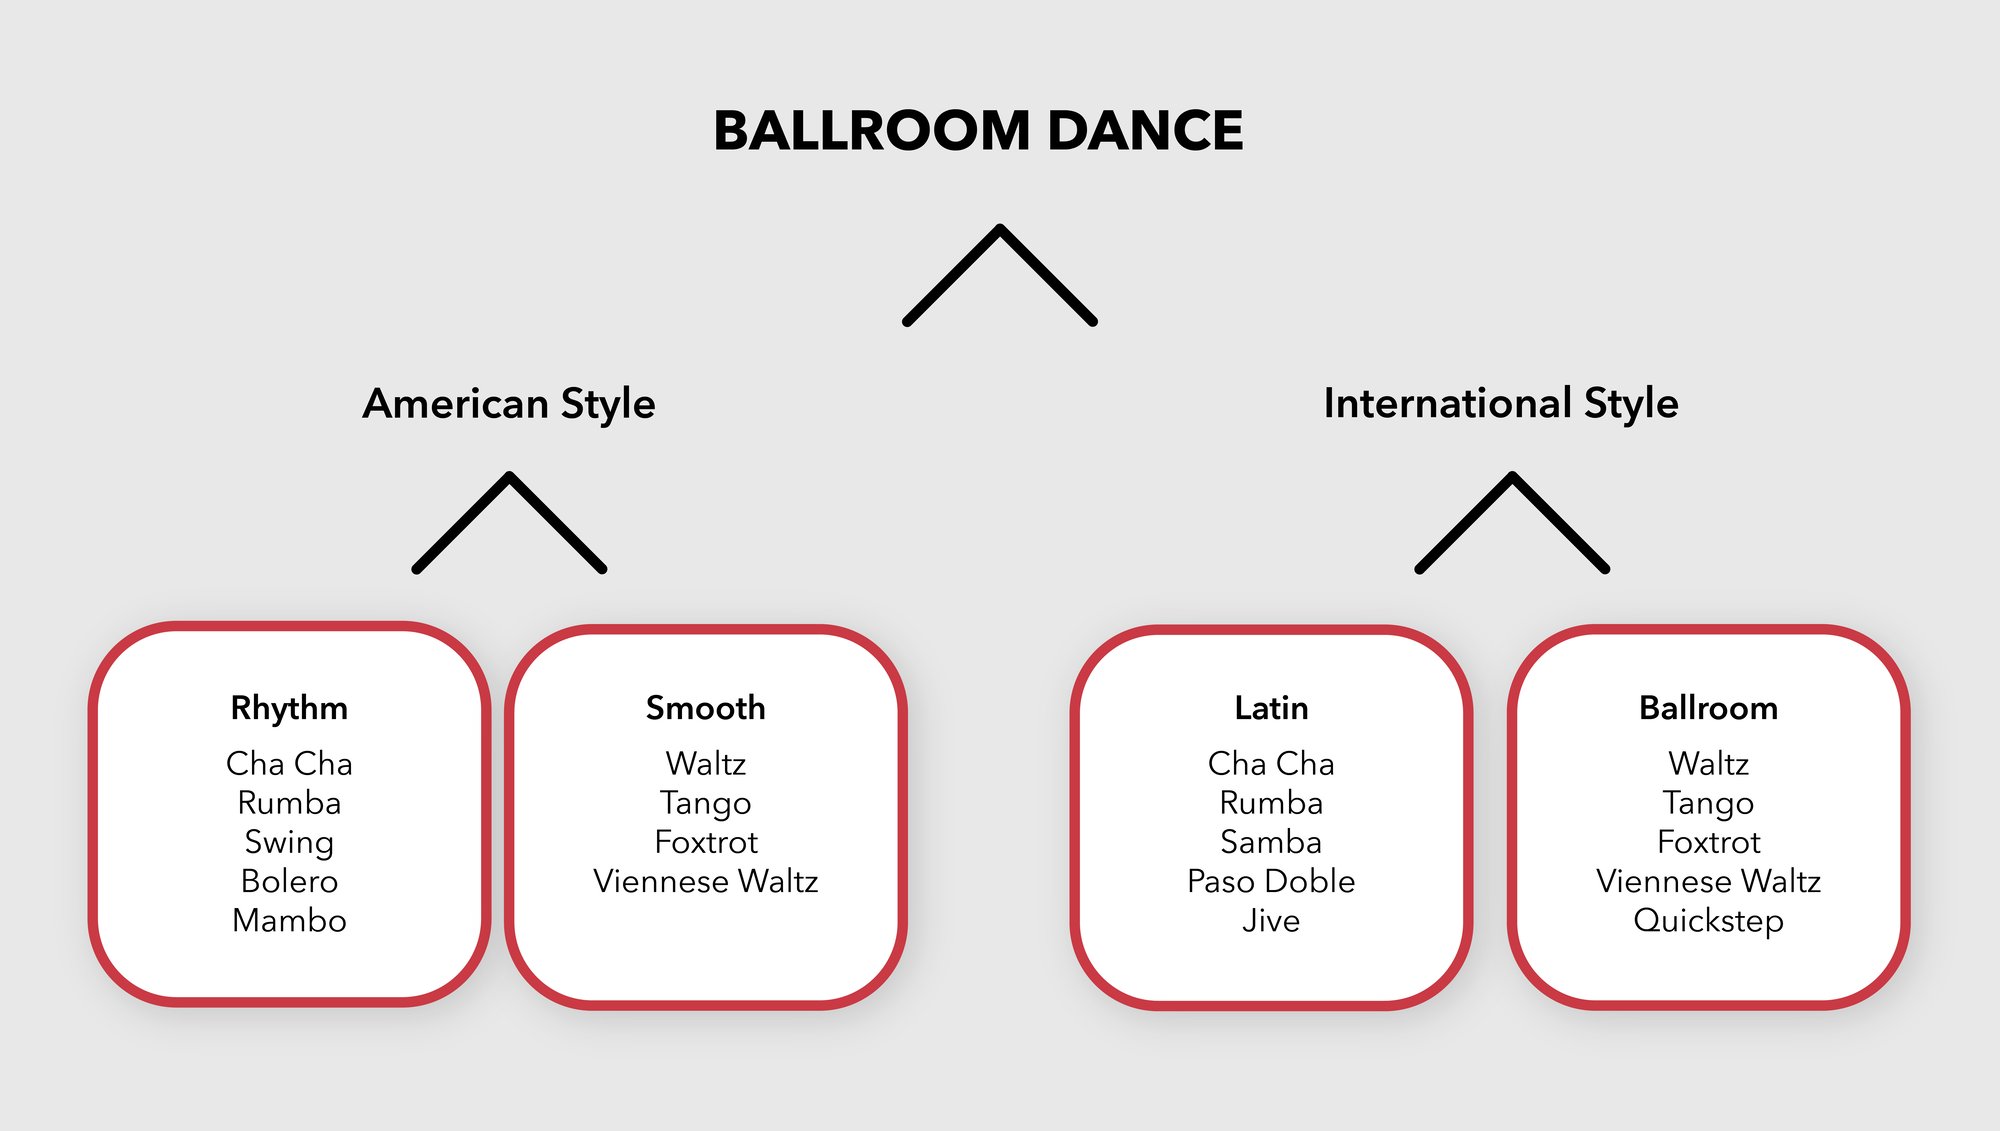 create an essay about the essence of ballroom dance position